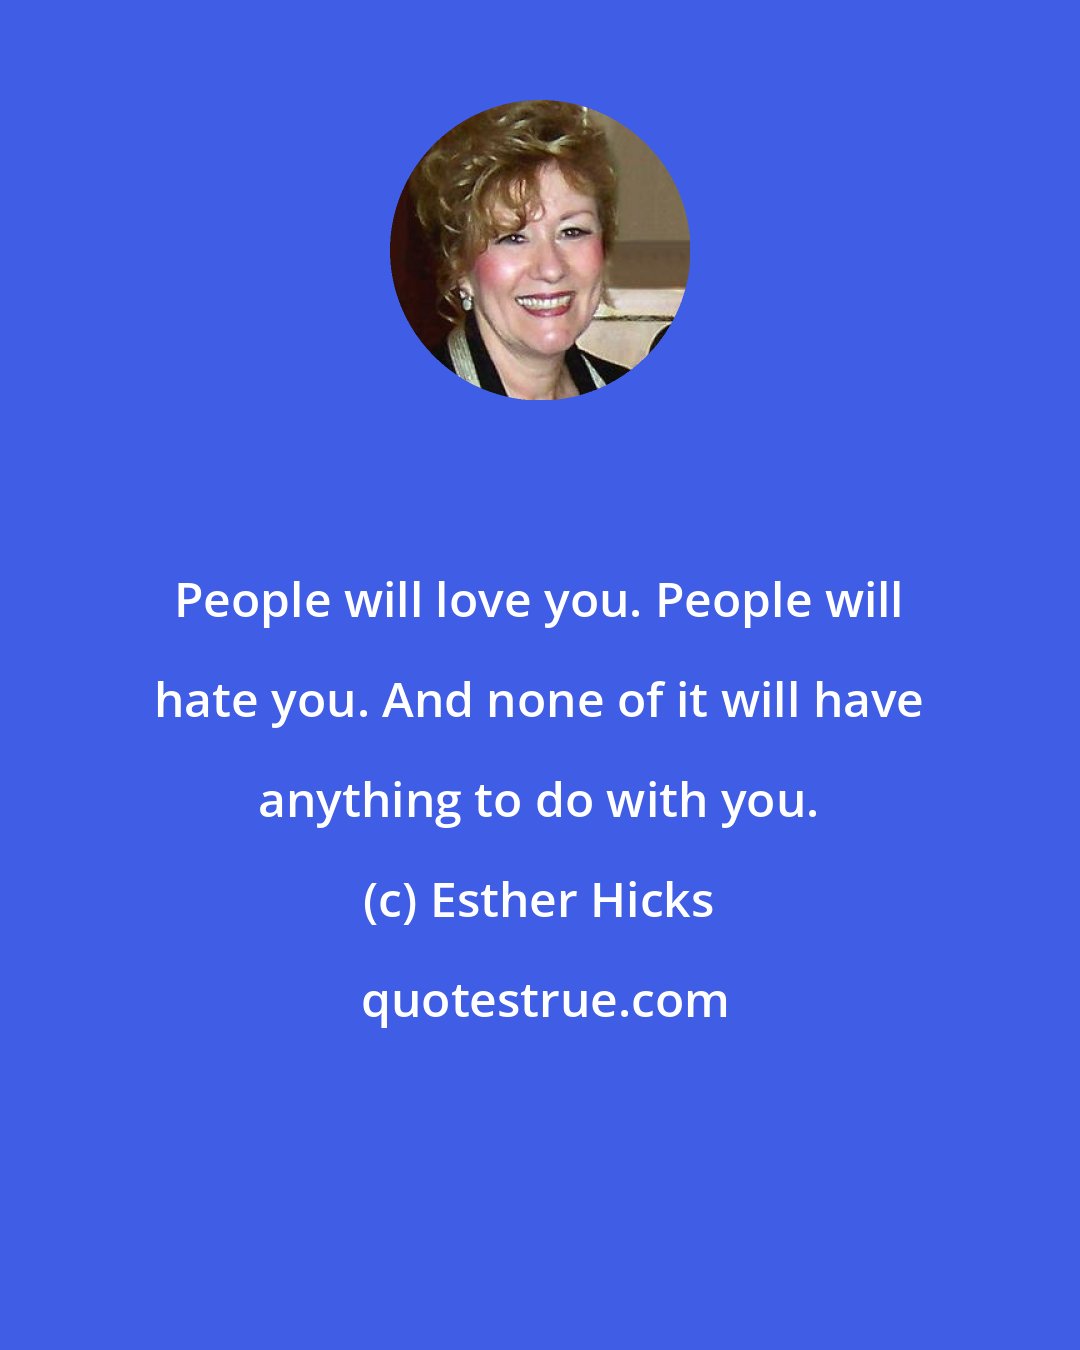 Esther Hicks: People will love you. People will hate you. And none of it will have anything to do with you.